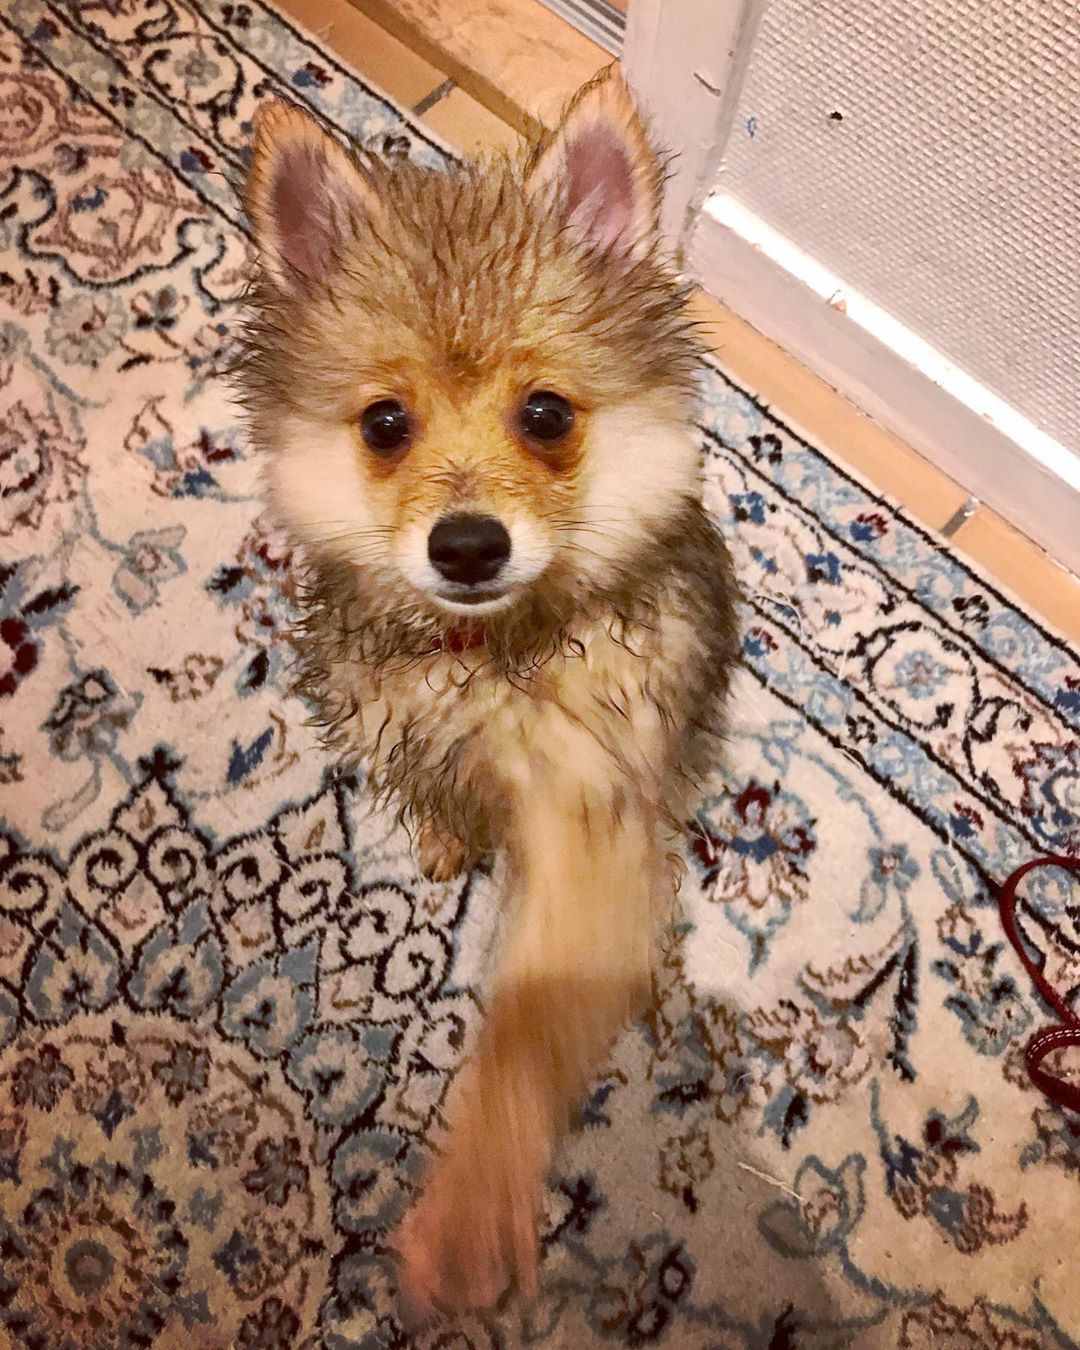 A wet Pomeranian standing up while giving its one paw